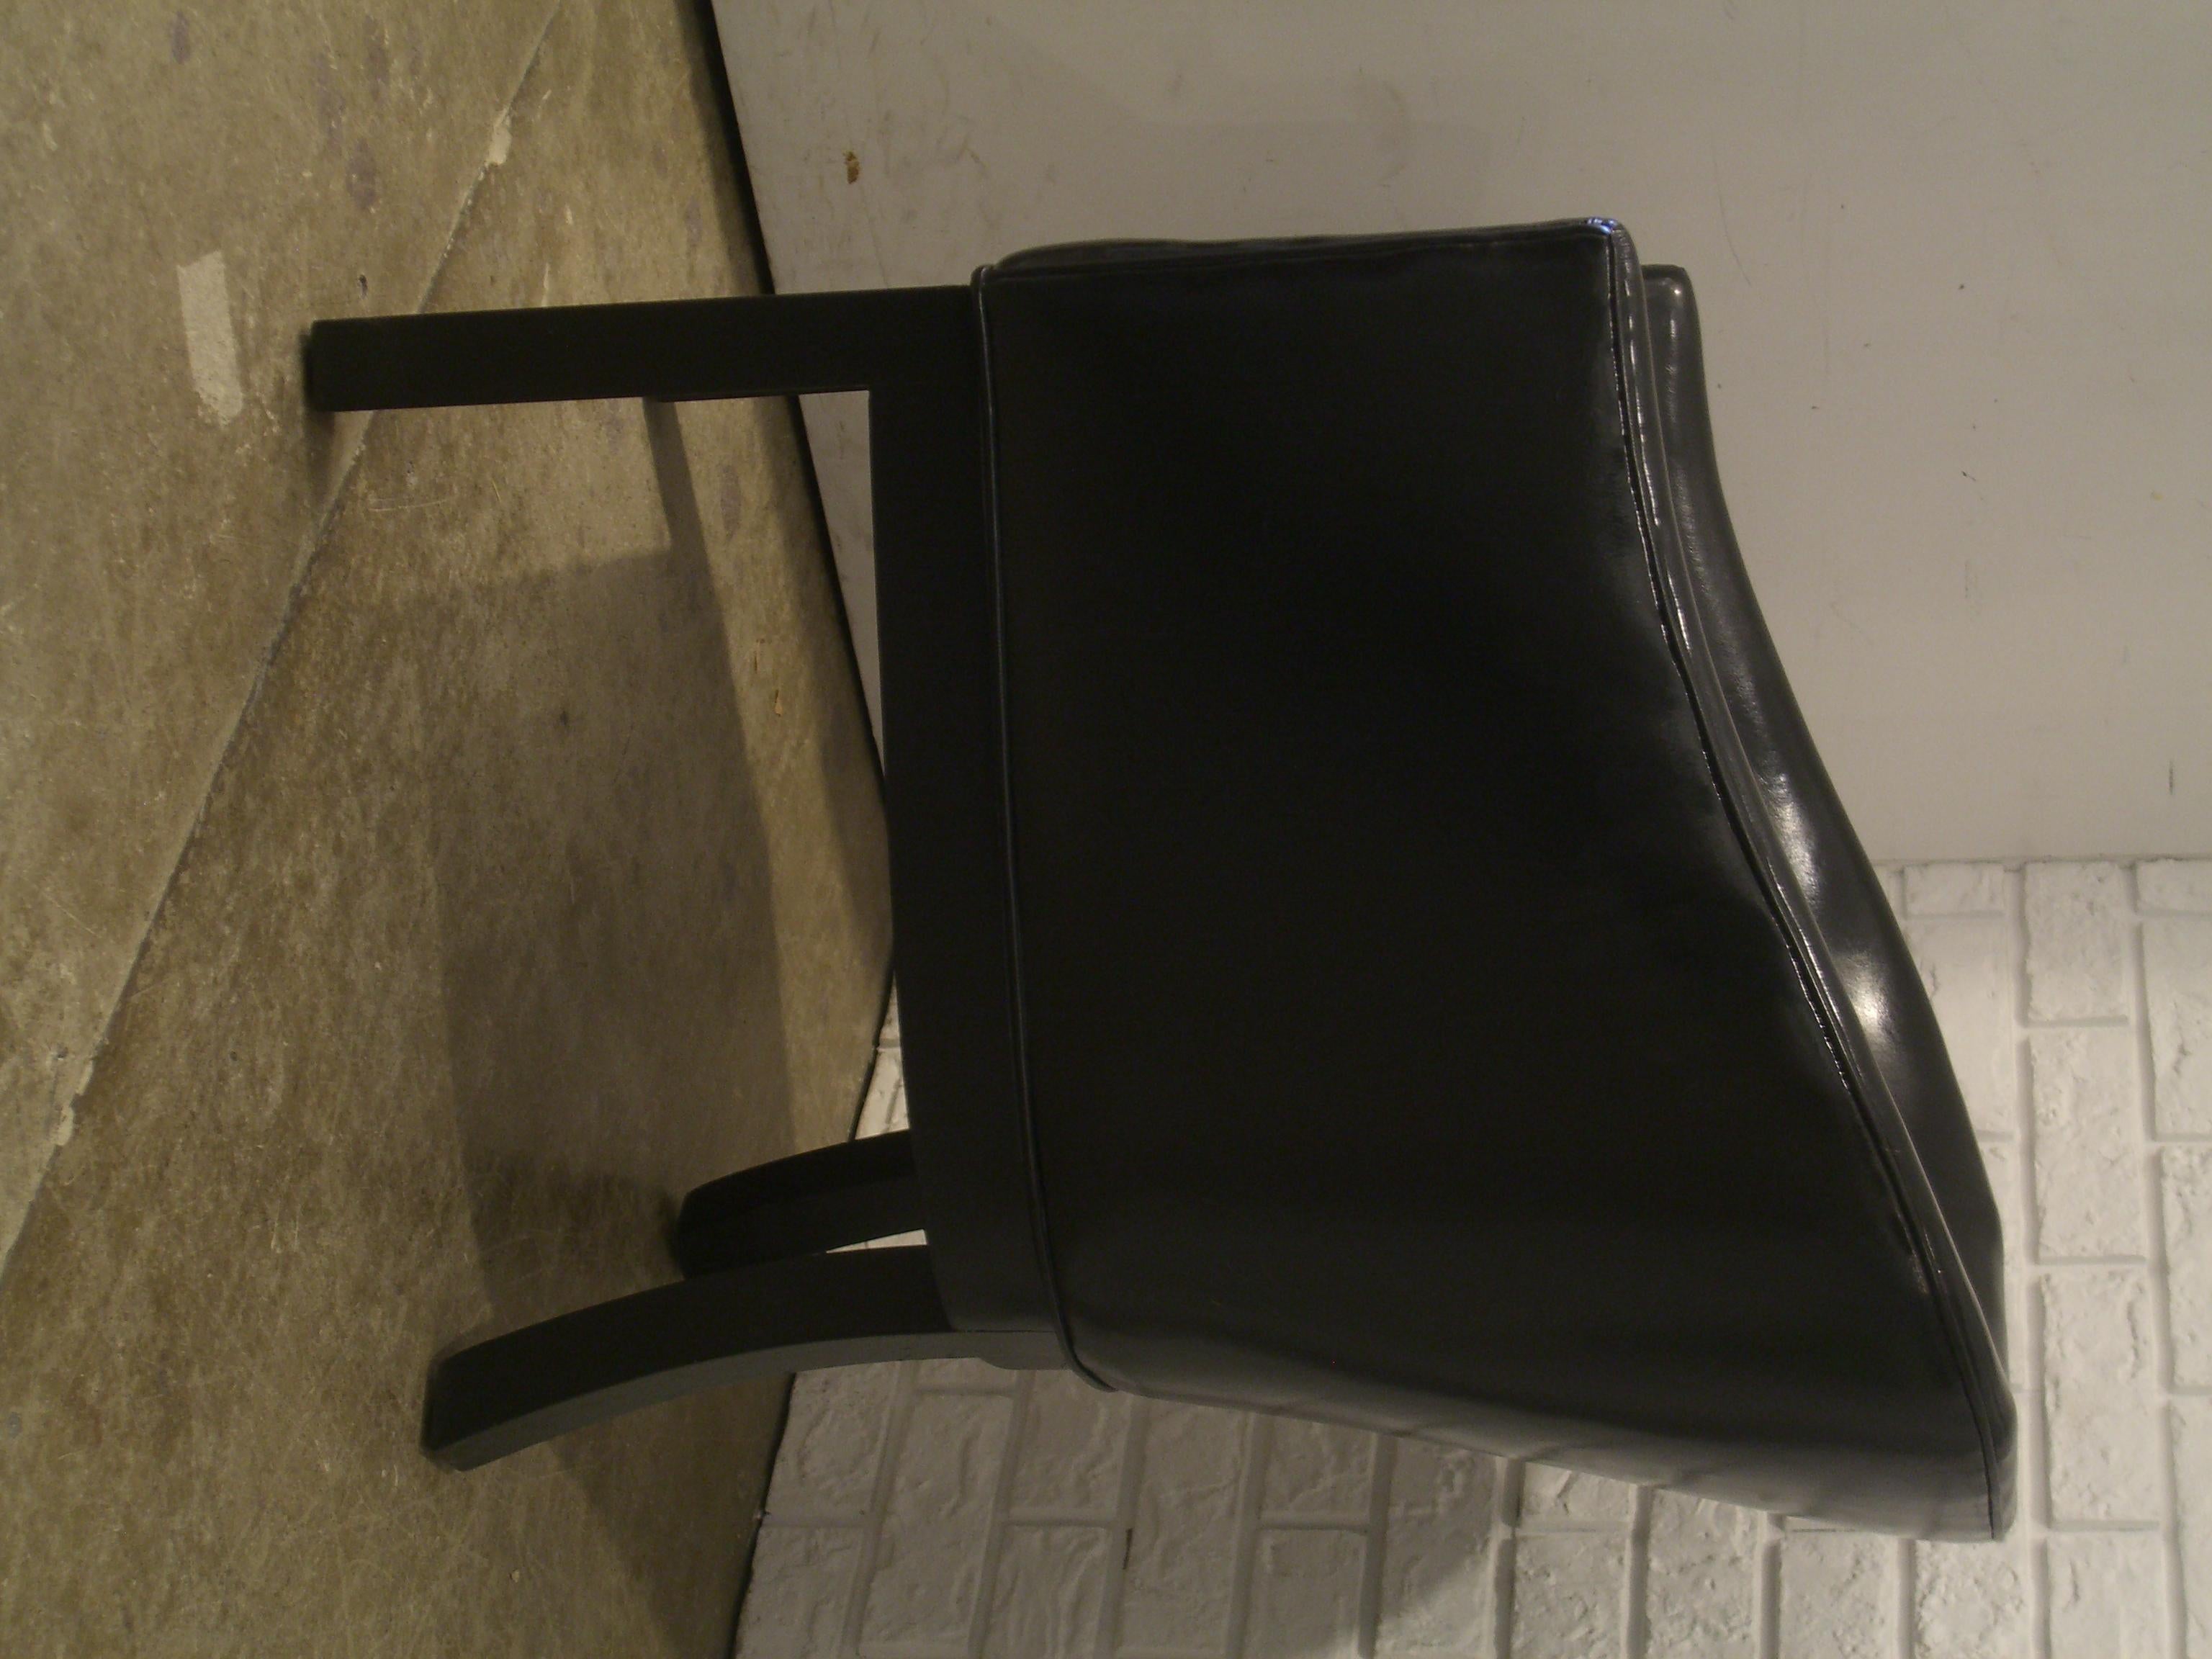 Black Vinyl Occasional Chair In Fair Condition For Sale In Washington, DC